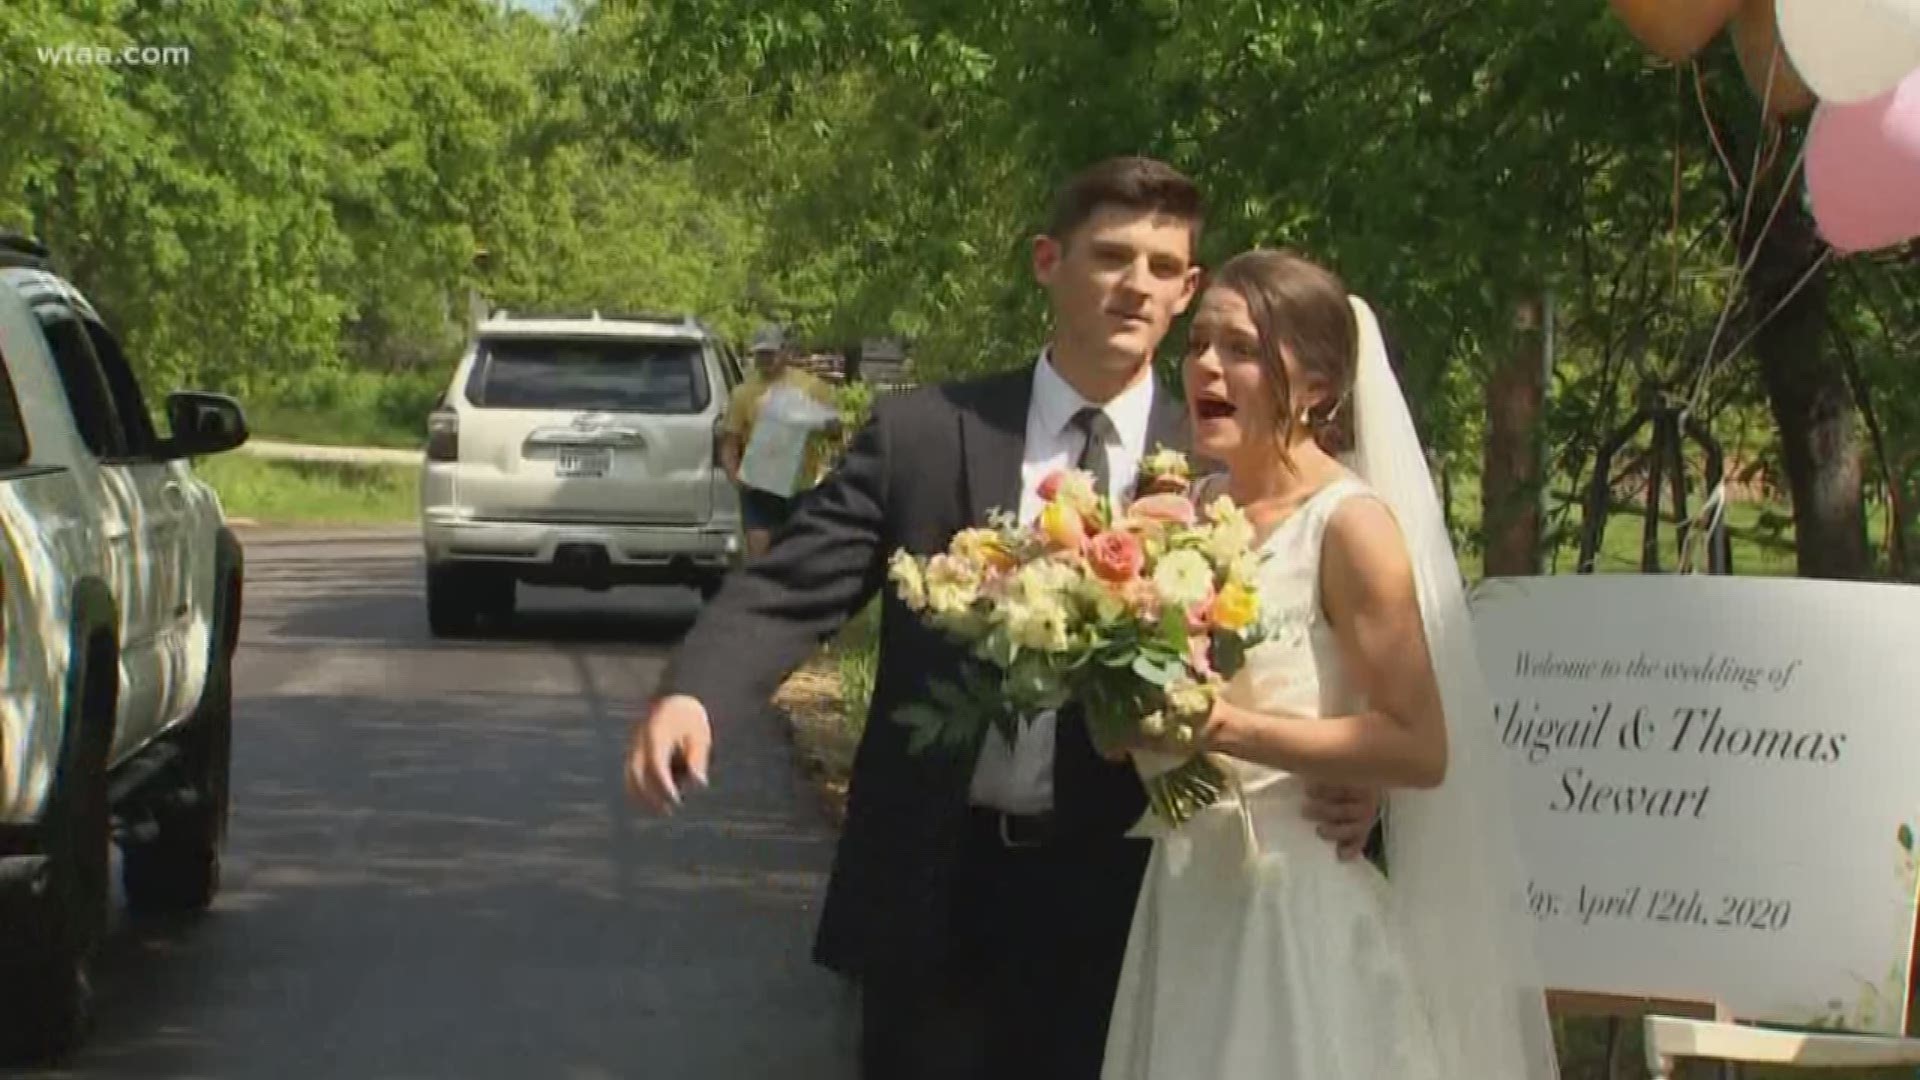 The Stewarts had to scrap their dream wedding, but they kept the date, and the guest list at 10. Still, friends and family just couldn't stay away on their big day.